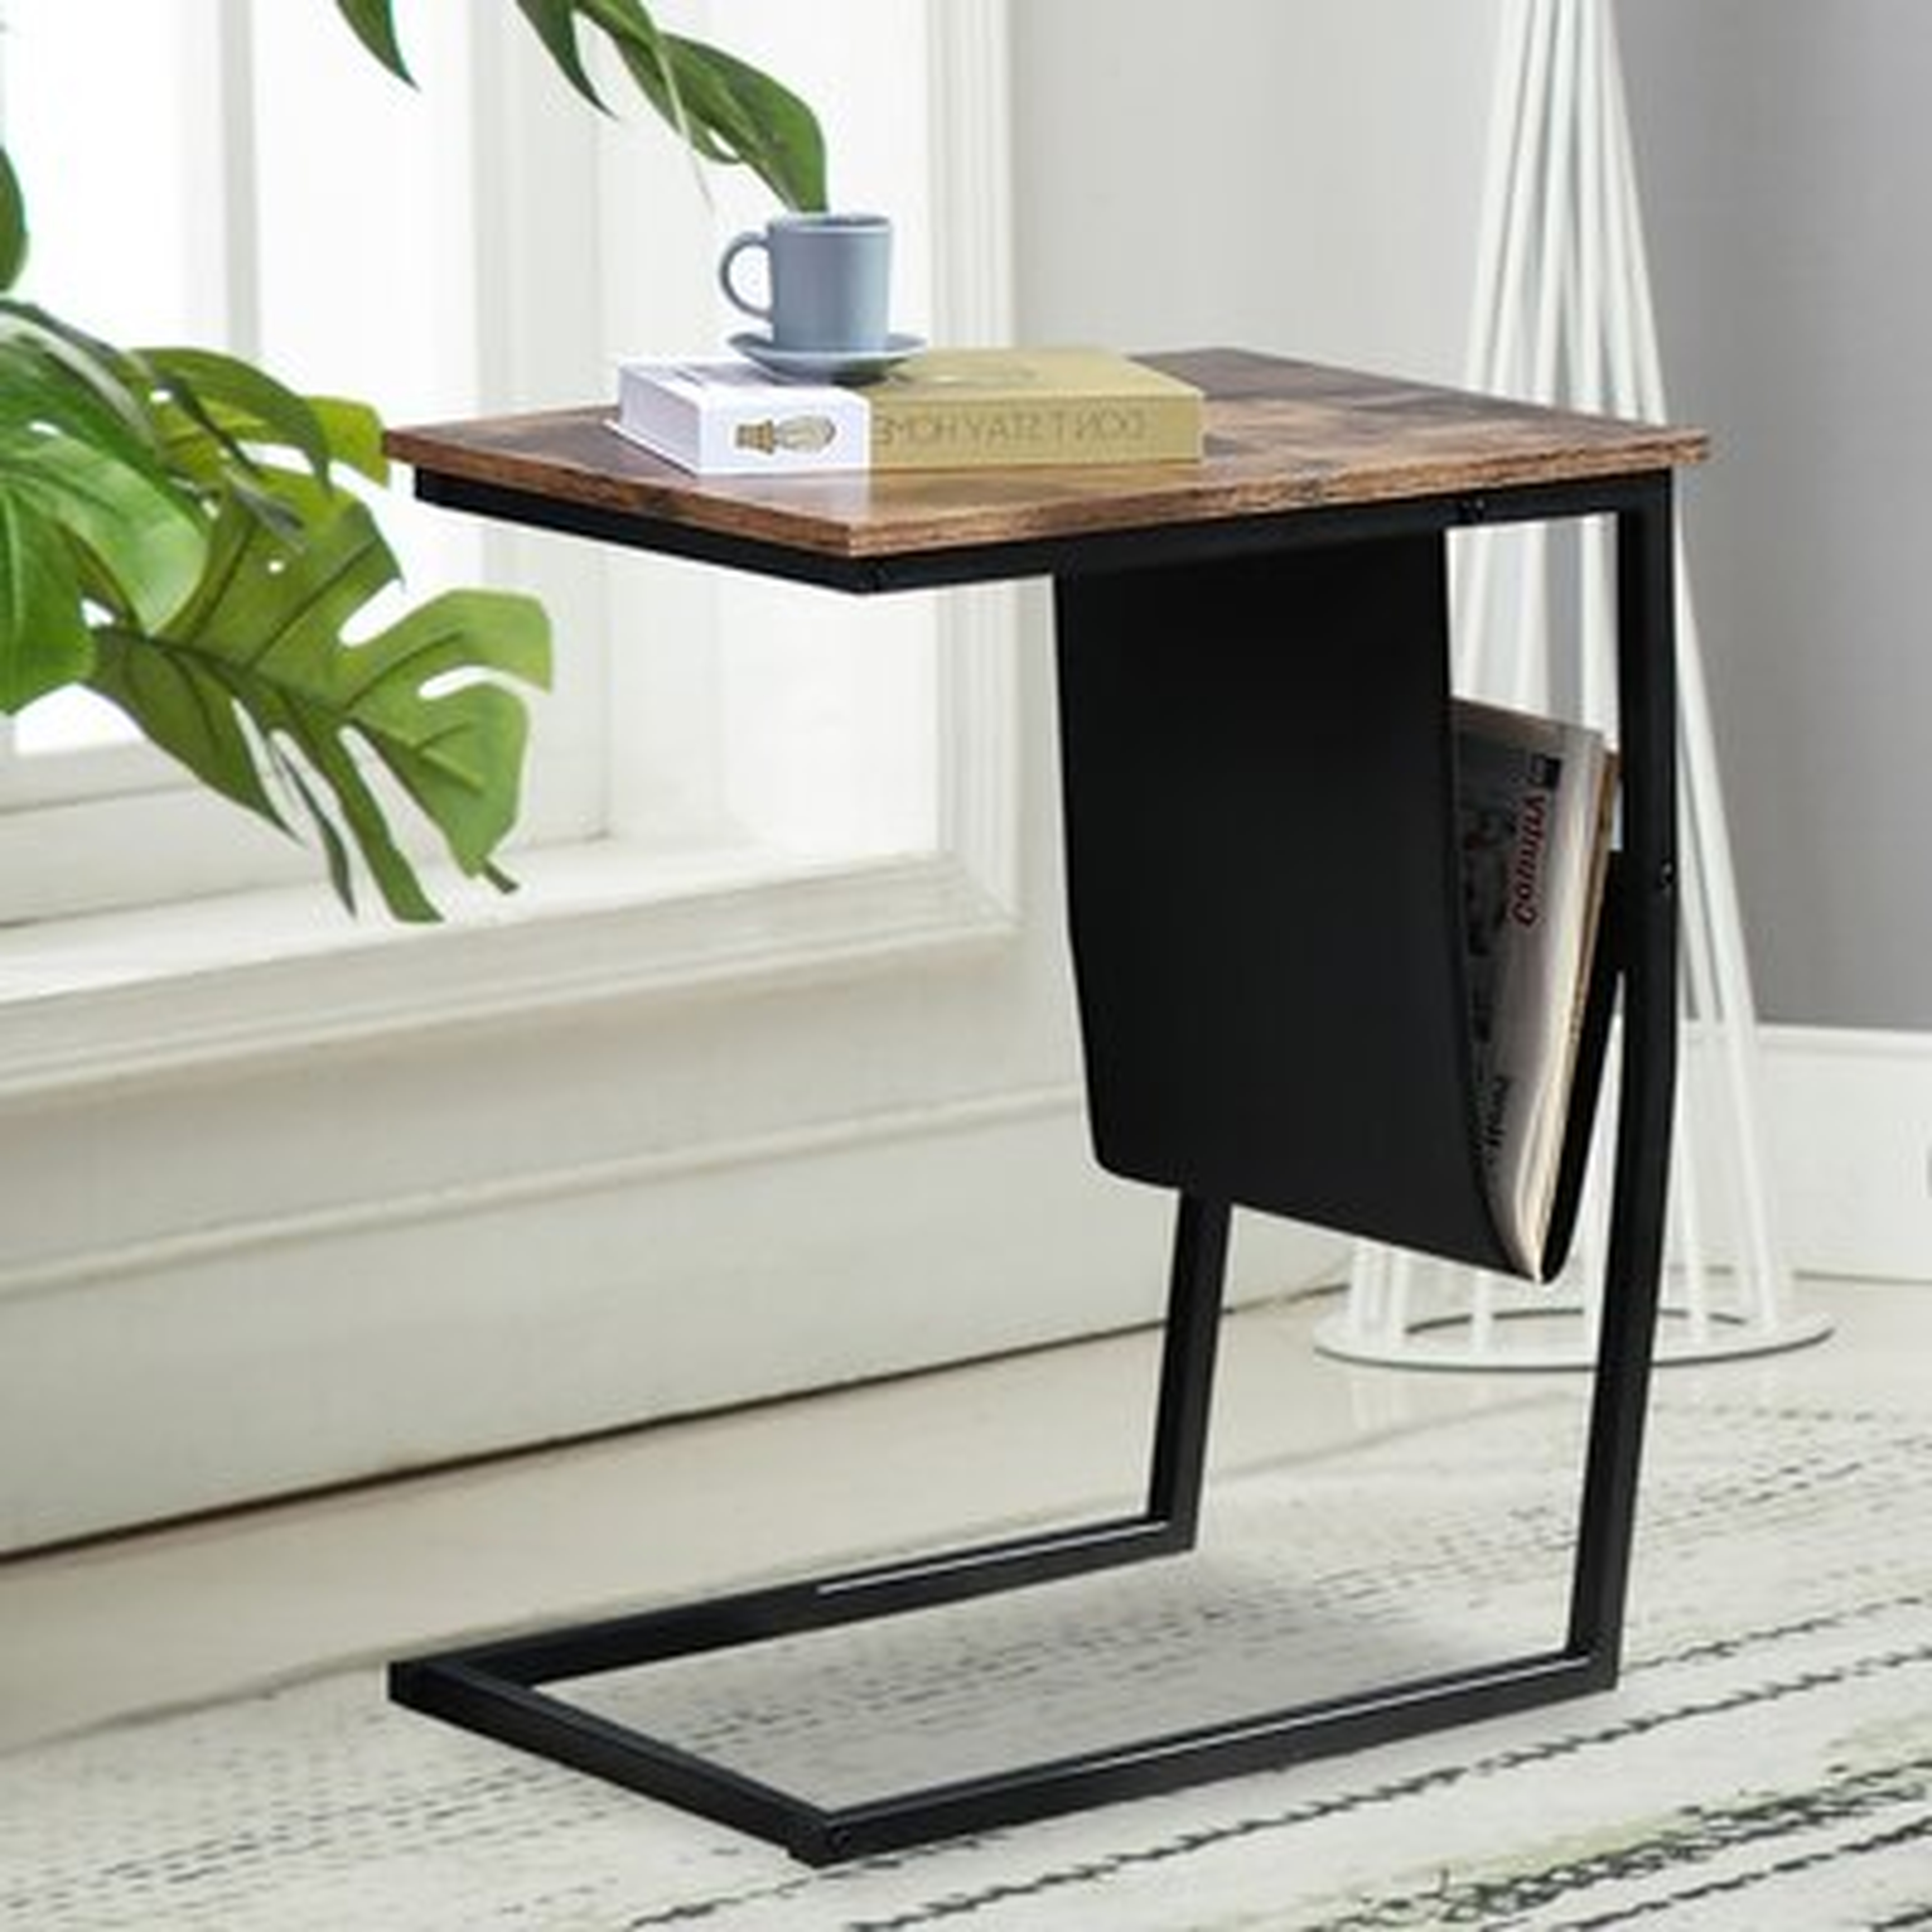 Industrial Side Table, Mobile Snack Table For Coffee Laptop Tablet, Slides Next To Sofa Couch, Wood Look Accent Furniture With Metal Frame - Wayfair